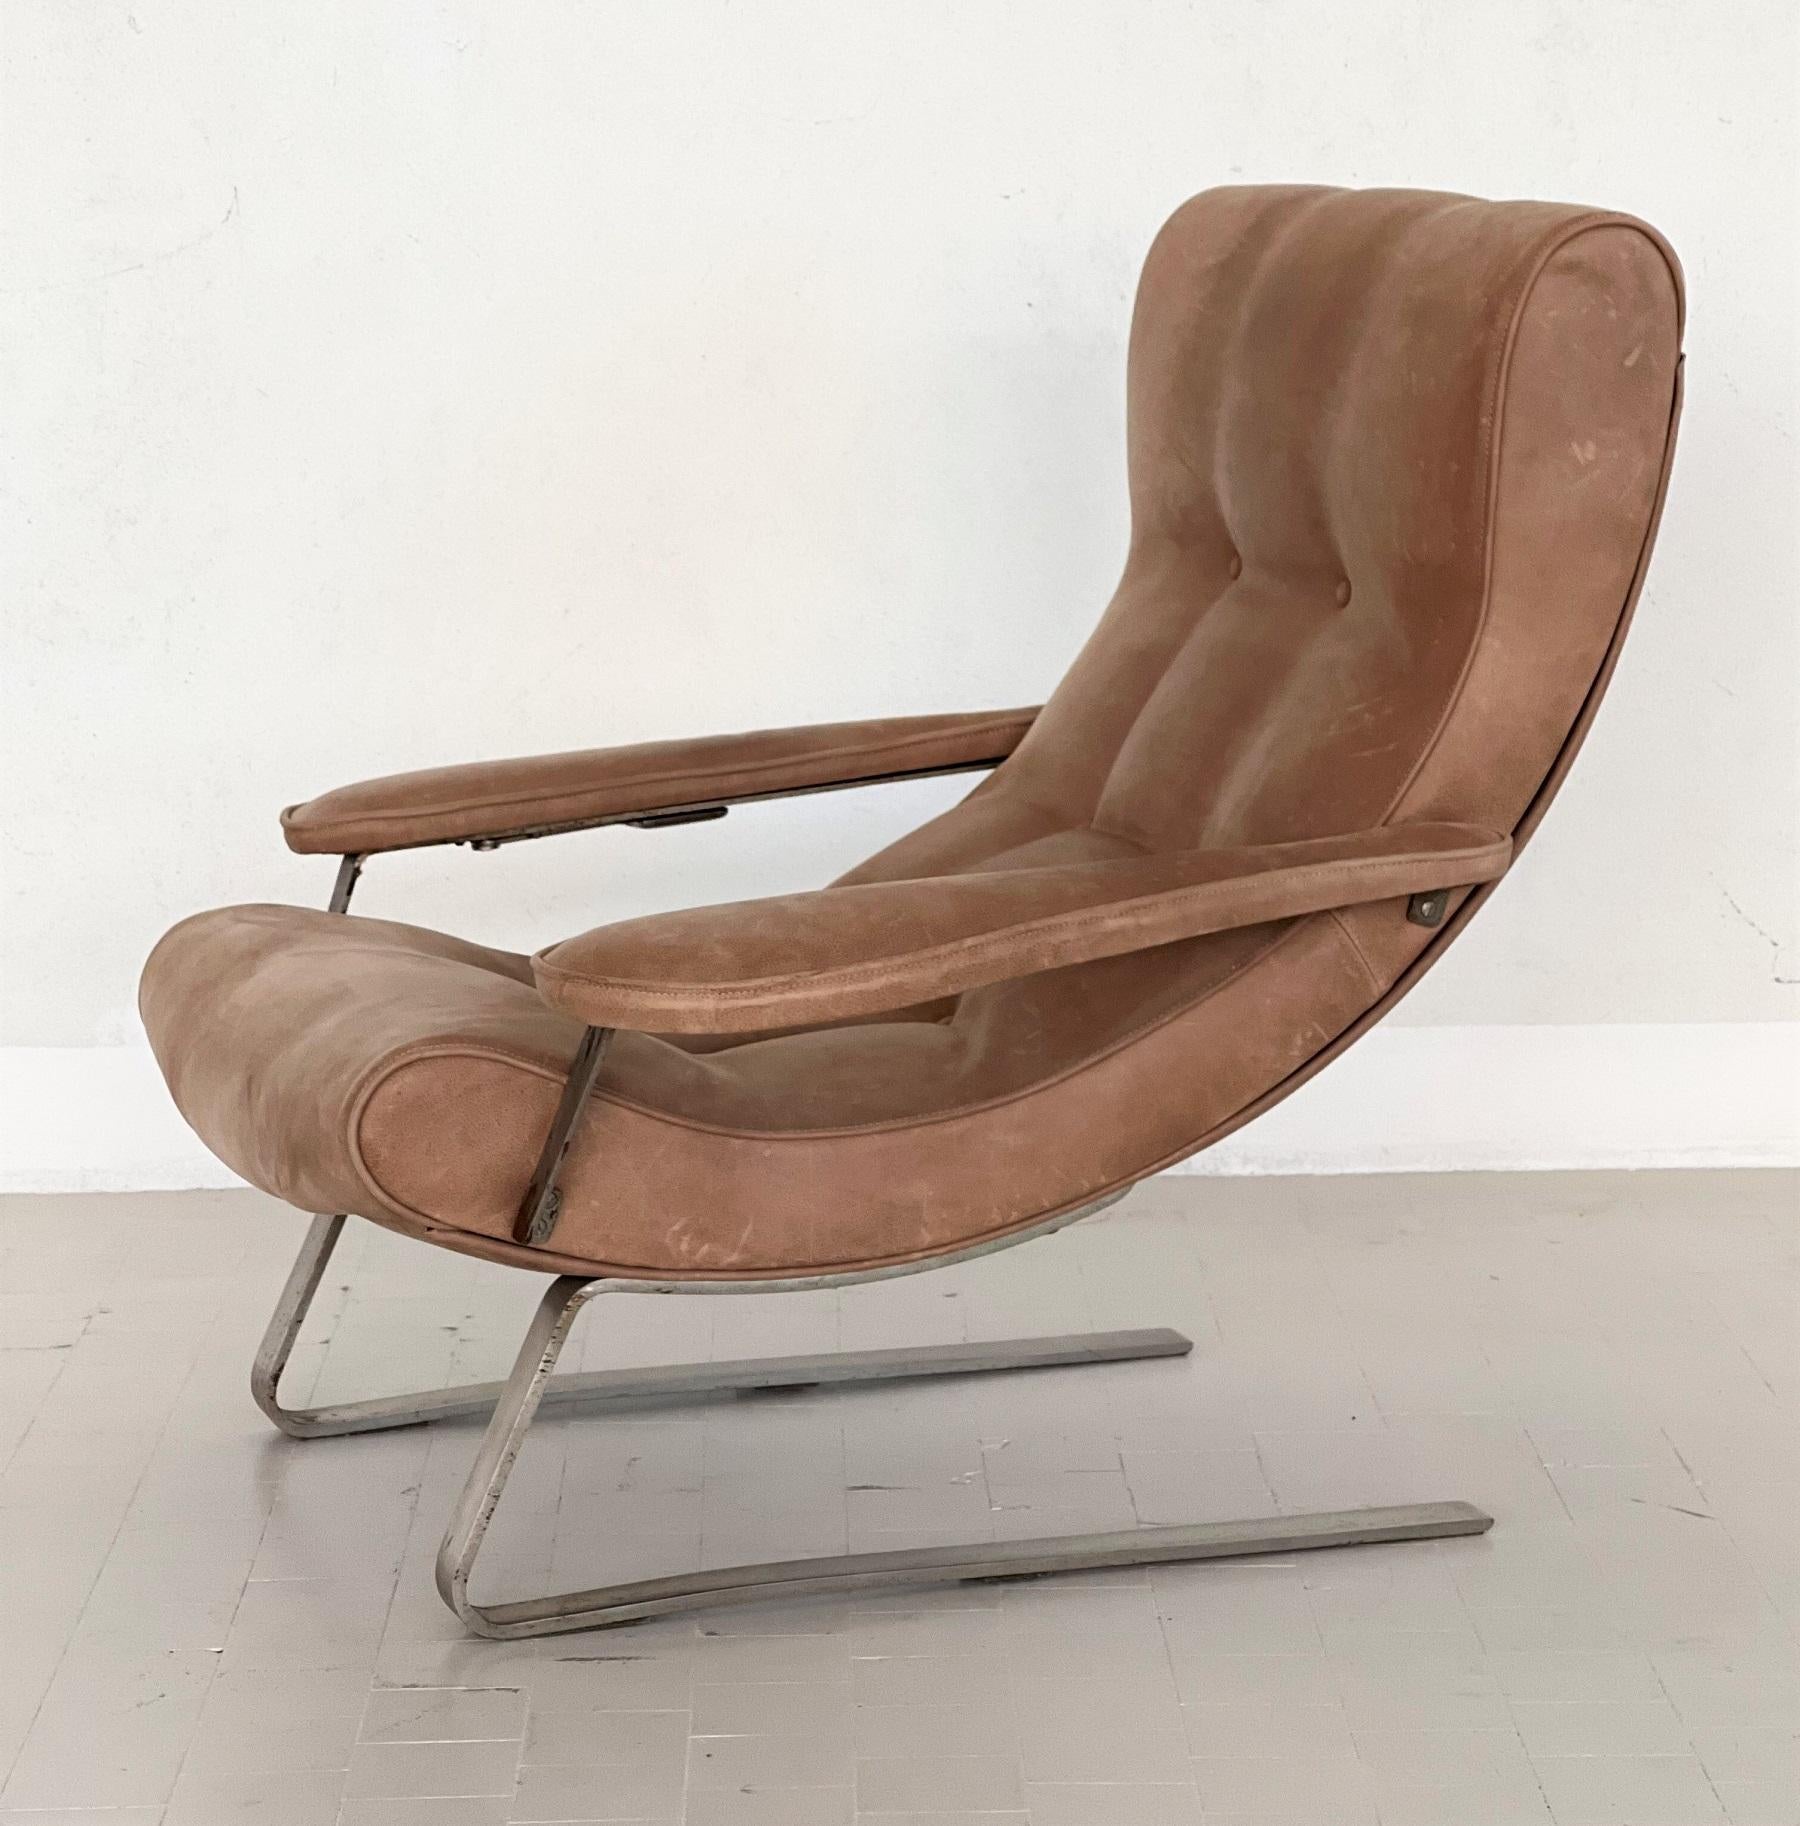 Italian Midcentury Lounge Chair in Suede by Guido Bonzani for Tecnosalotto, 1970s For Sale